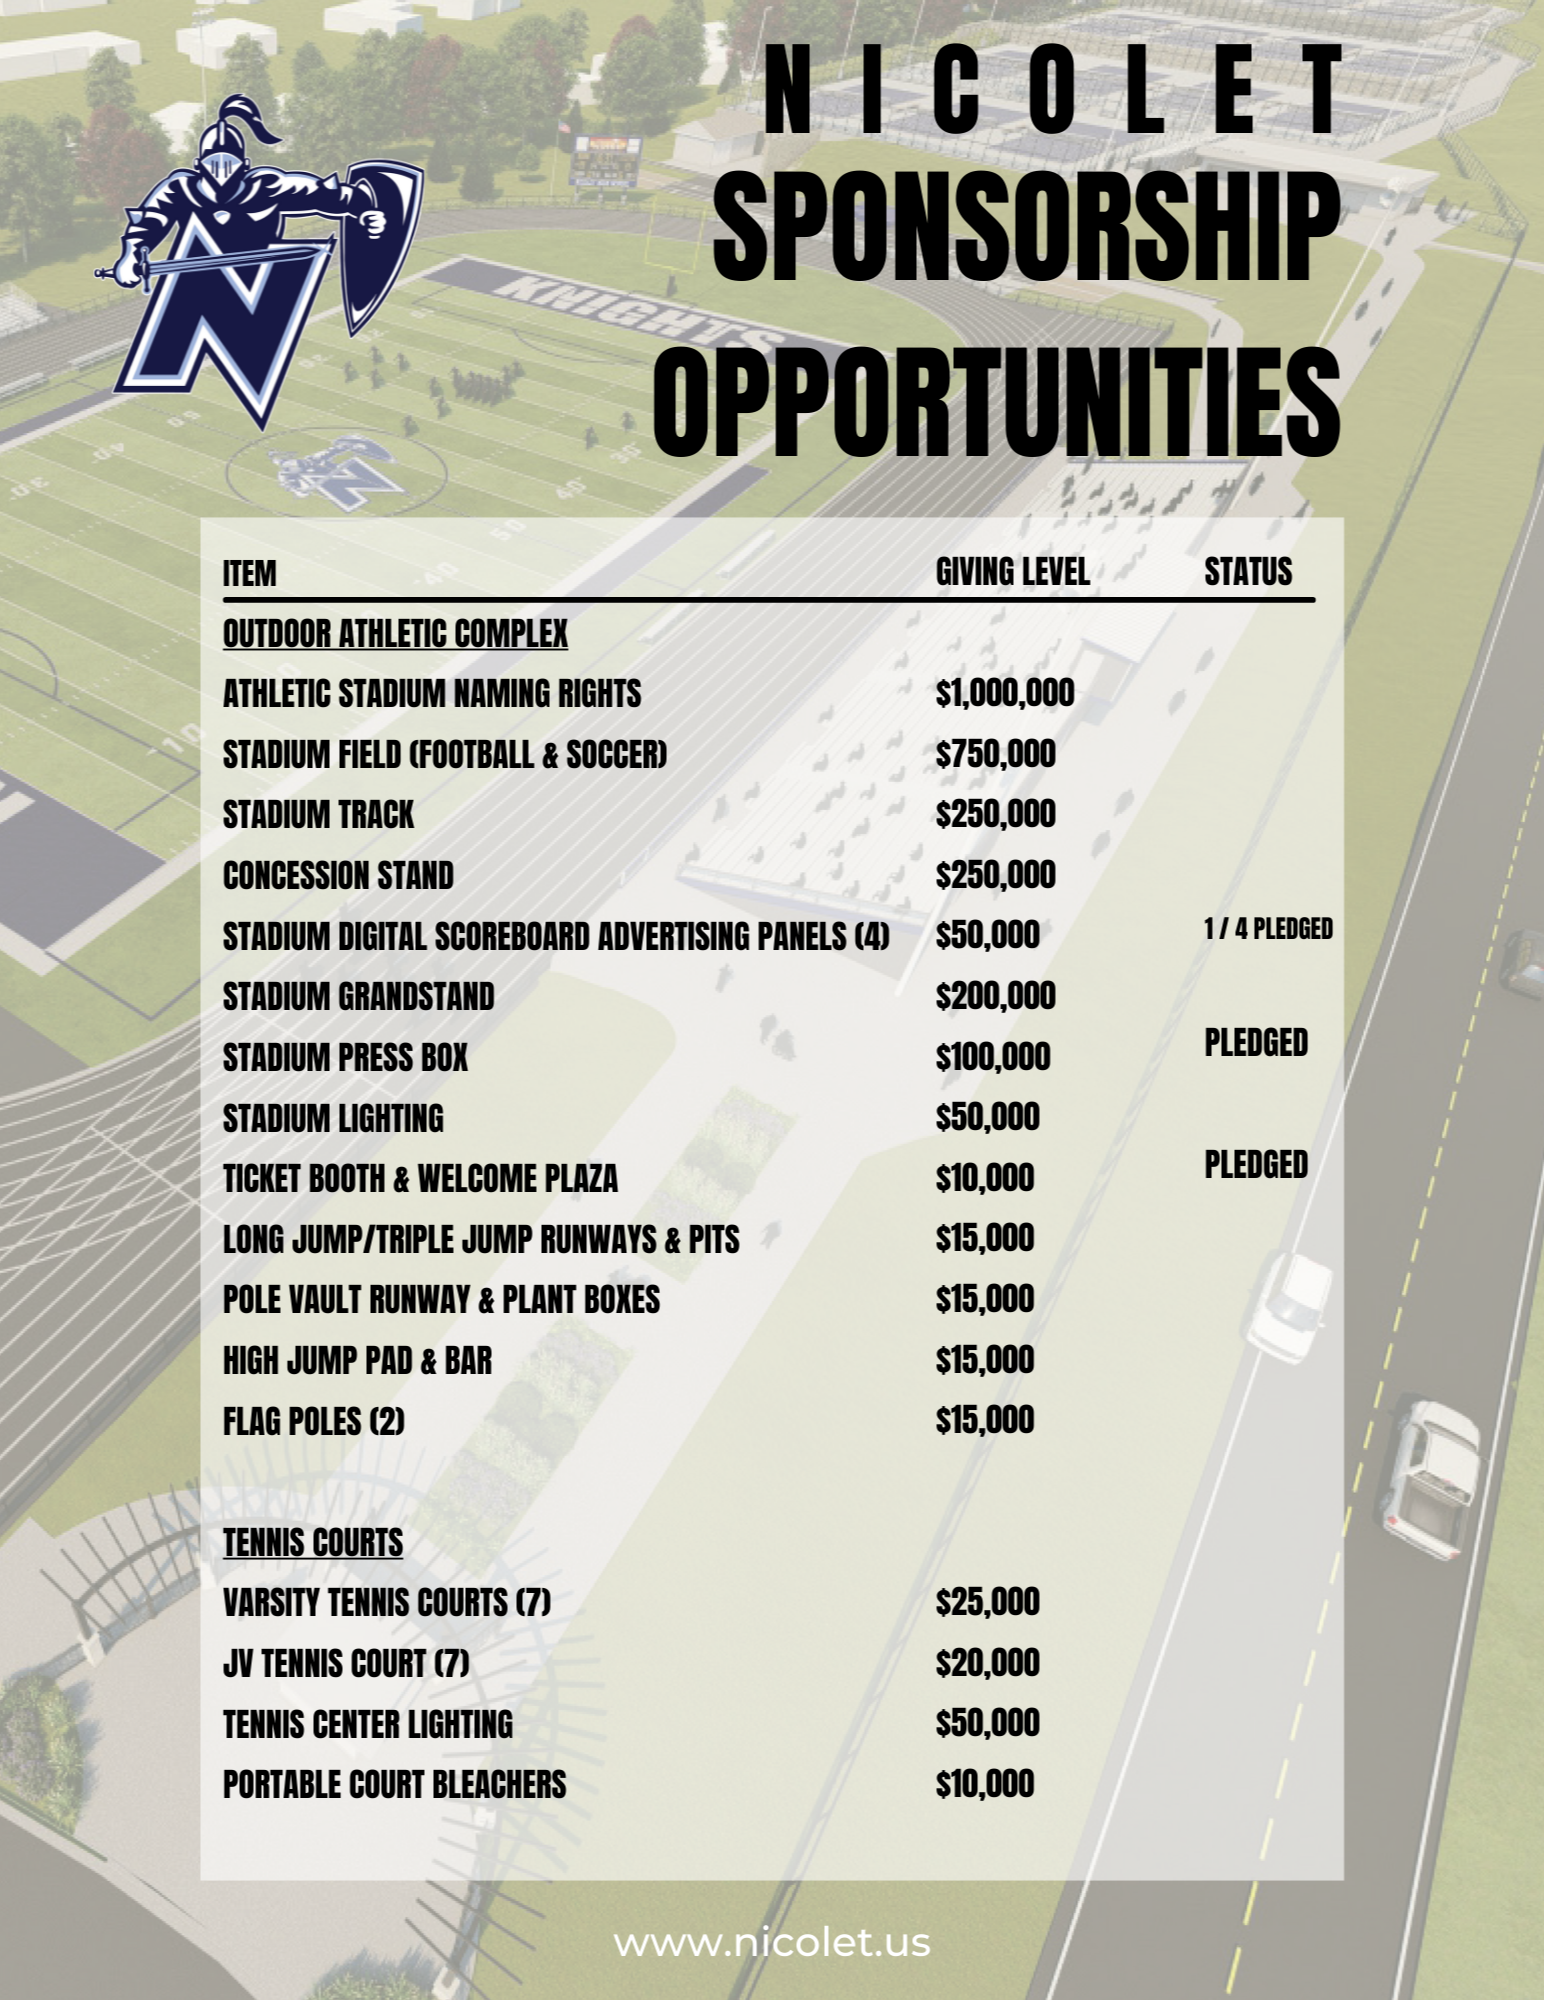 picture of sponsorship opportunities for the nicolet outdoor athletic facilities